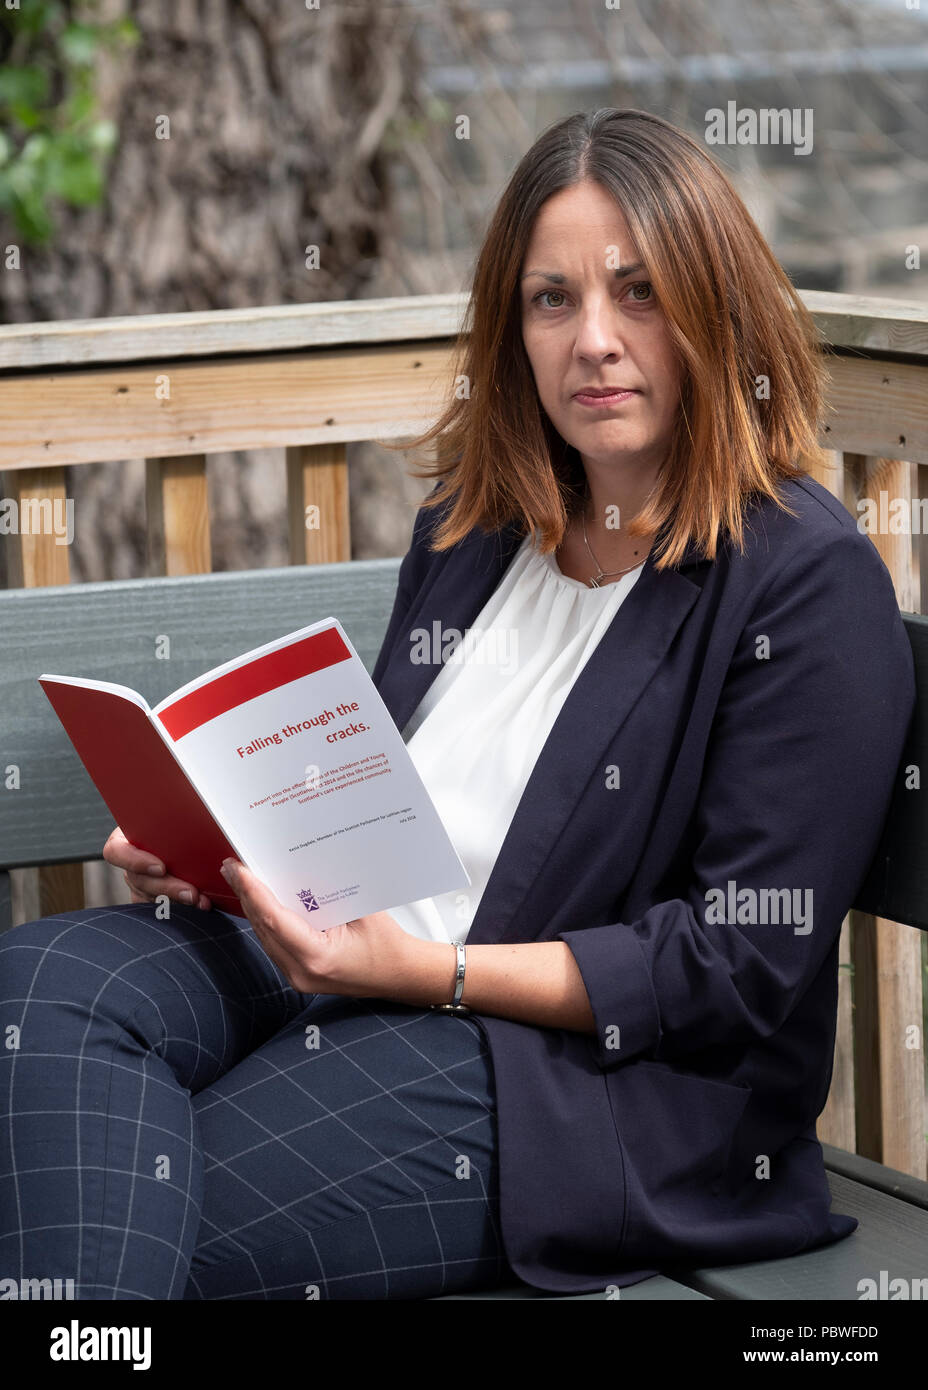 Edinburgh, Scotland, UK; 30 July , 2018. Lothian Labour MSP Kezia Dugdale launches major new report, “Falling through the cracks”, which examines the life chances of care-experienced young people in Scotland at the 6VT, Edinburgh City Youth Café in Edinburgh today. Credit: Iain Masterton/Alamy Live News Stock Photo